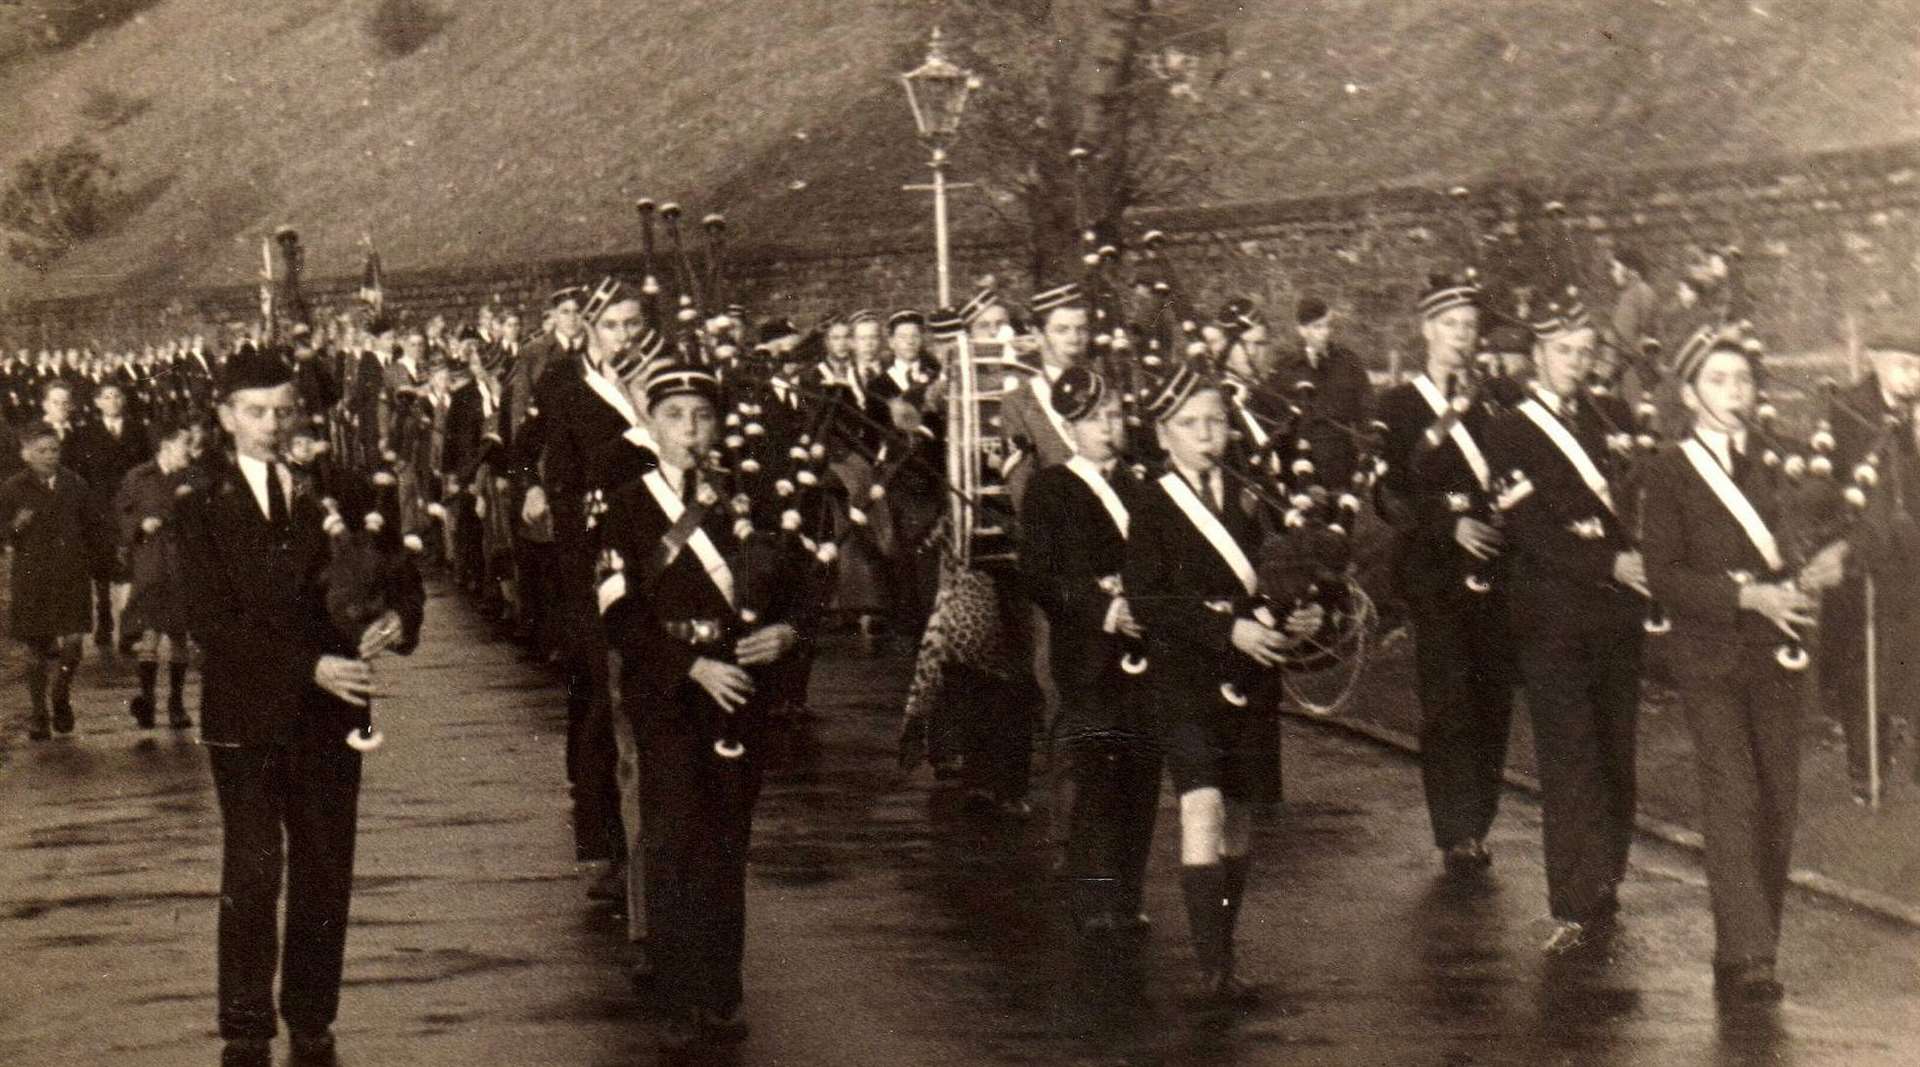 John Allan (front row in shorts) pursued his passion for piping as a member of the Boys Brigade.